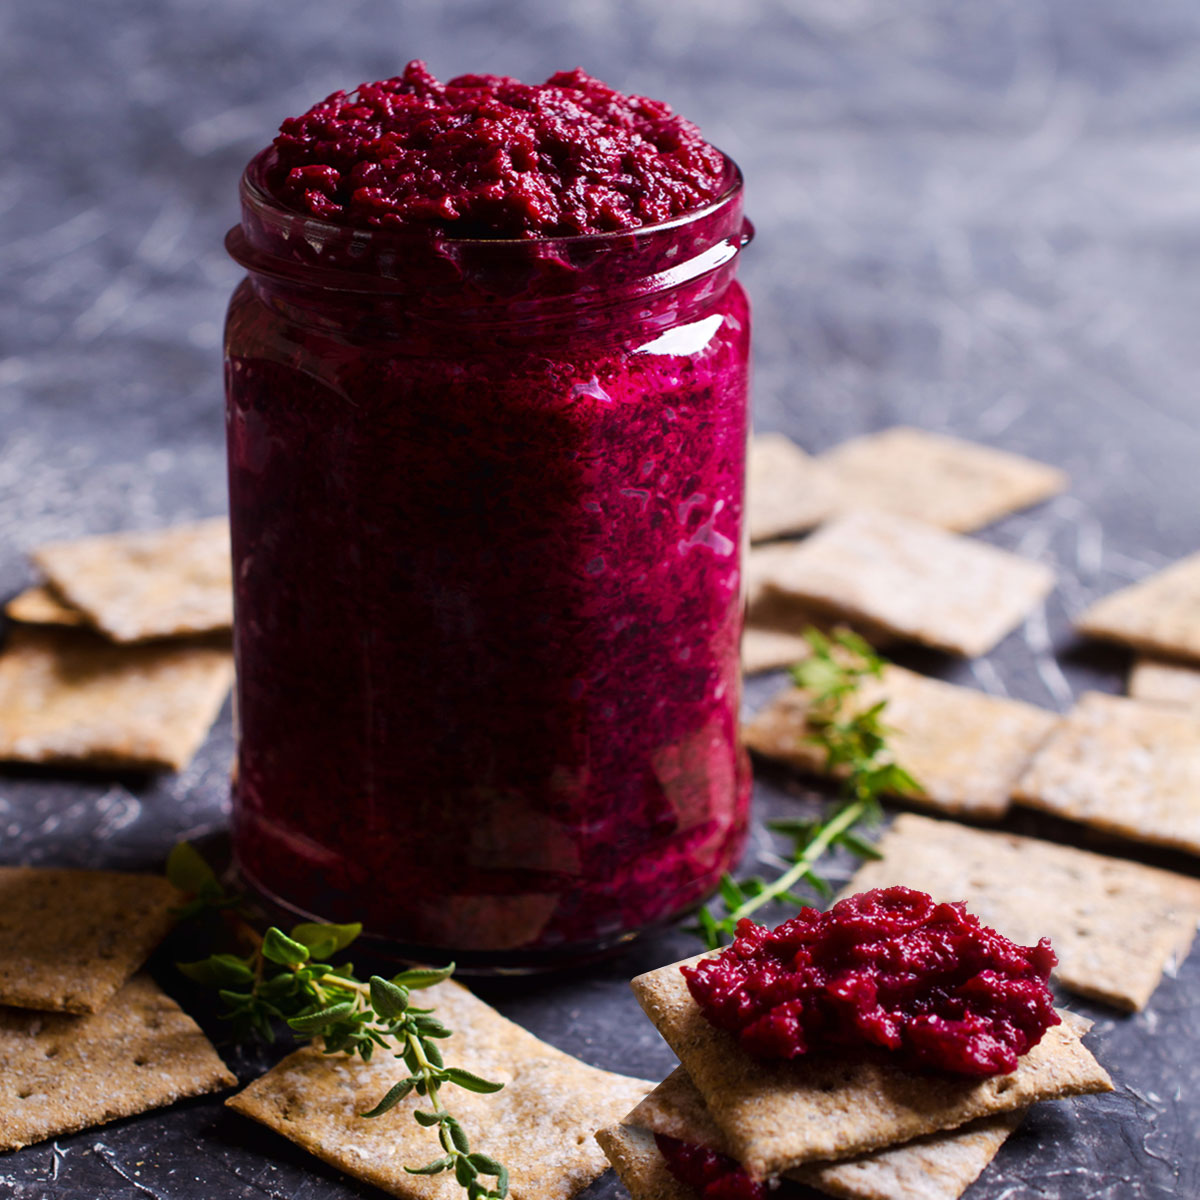 Ćwikła - a Polish-style beetroot horseradish in a jar, served with crackers